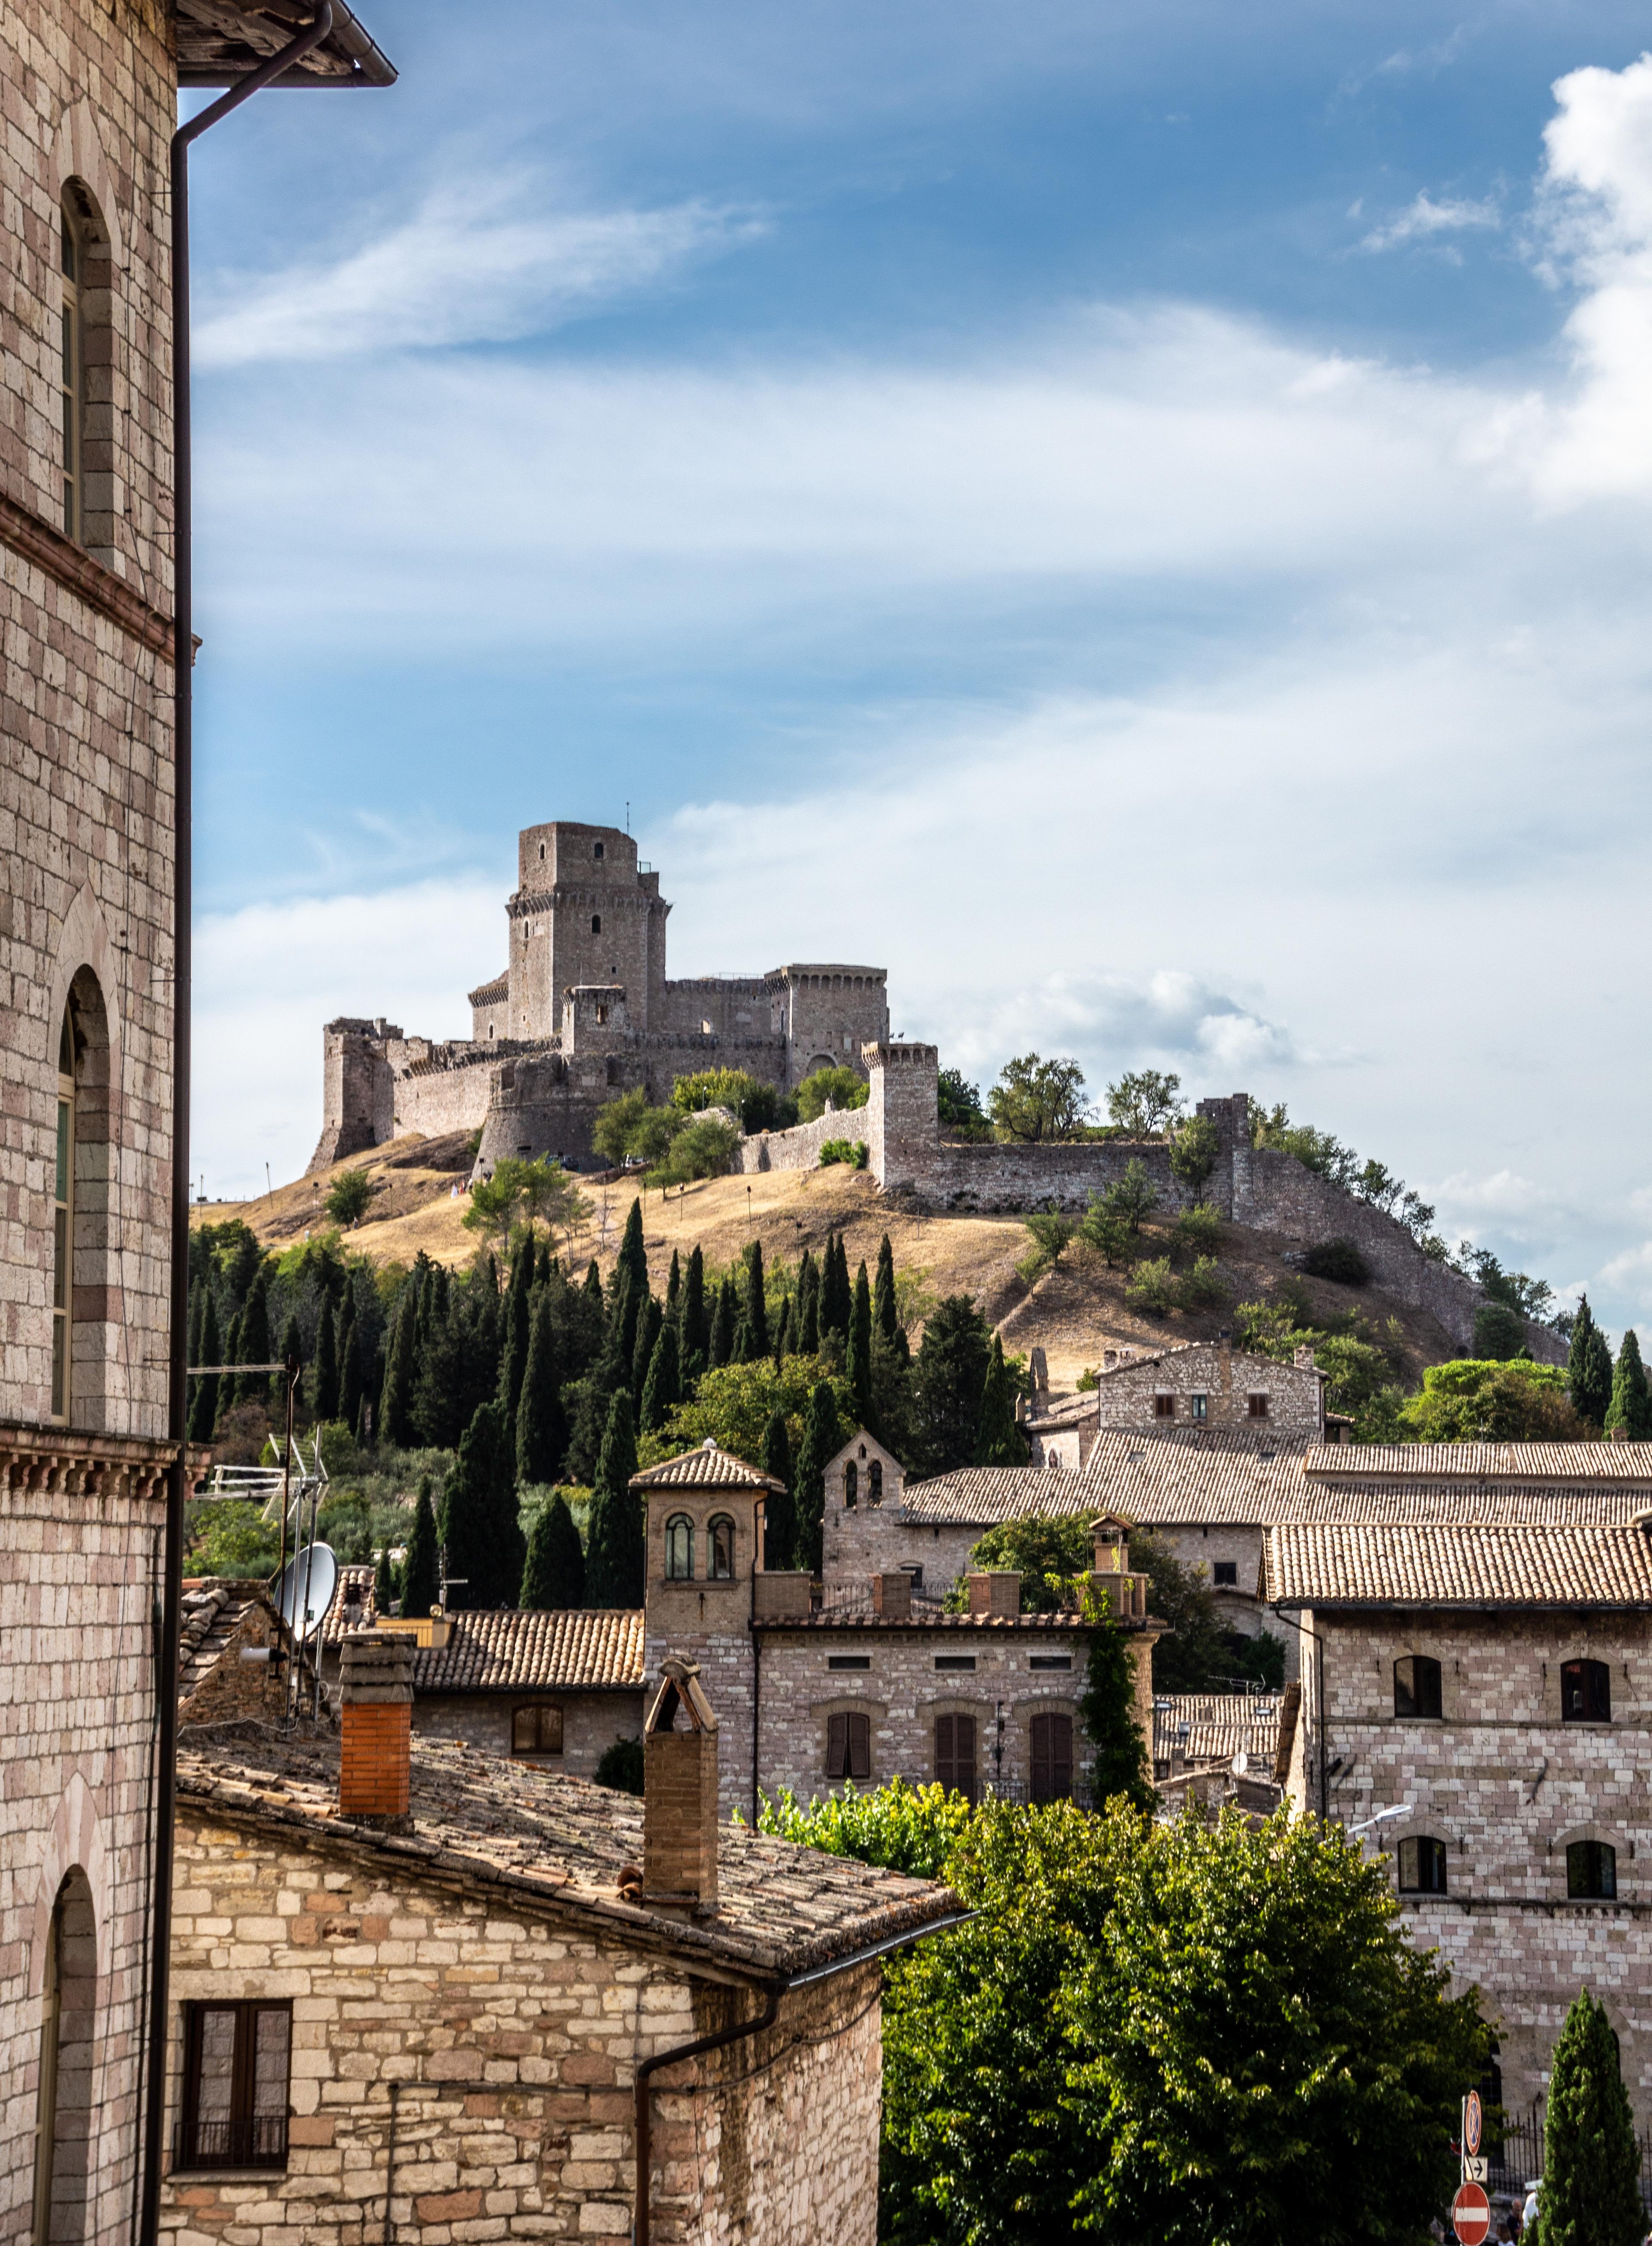 A glimpse of Assisi